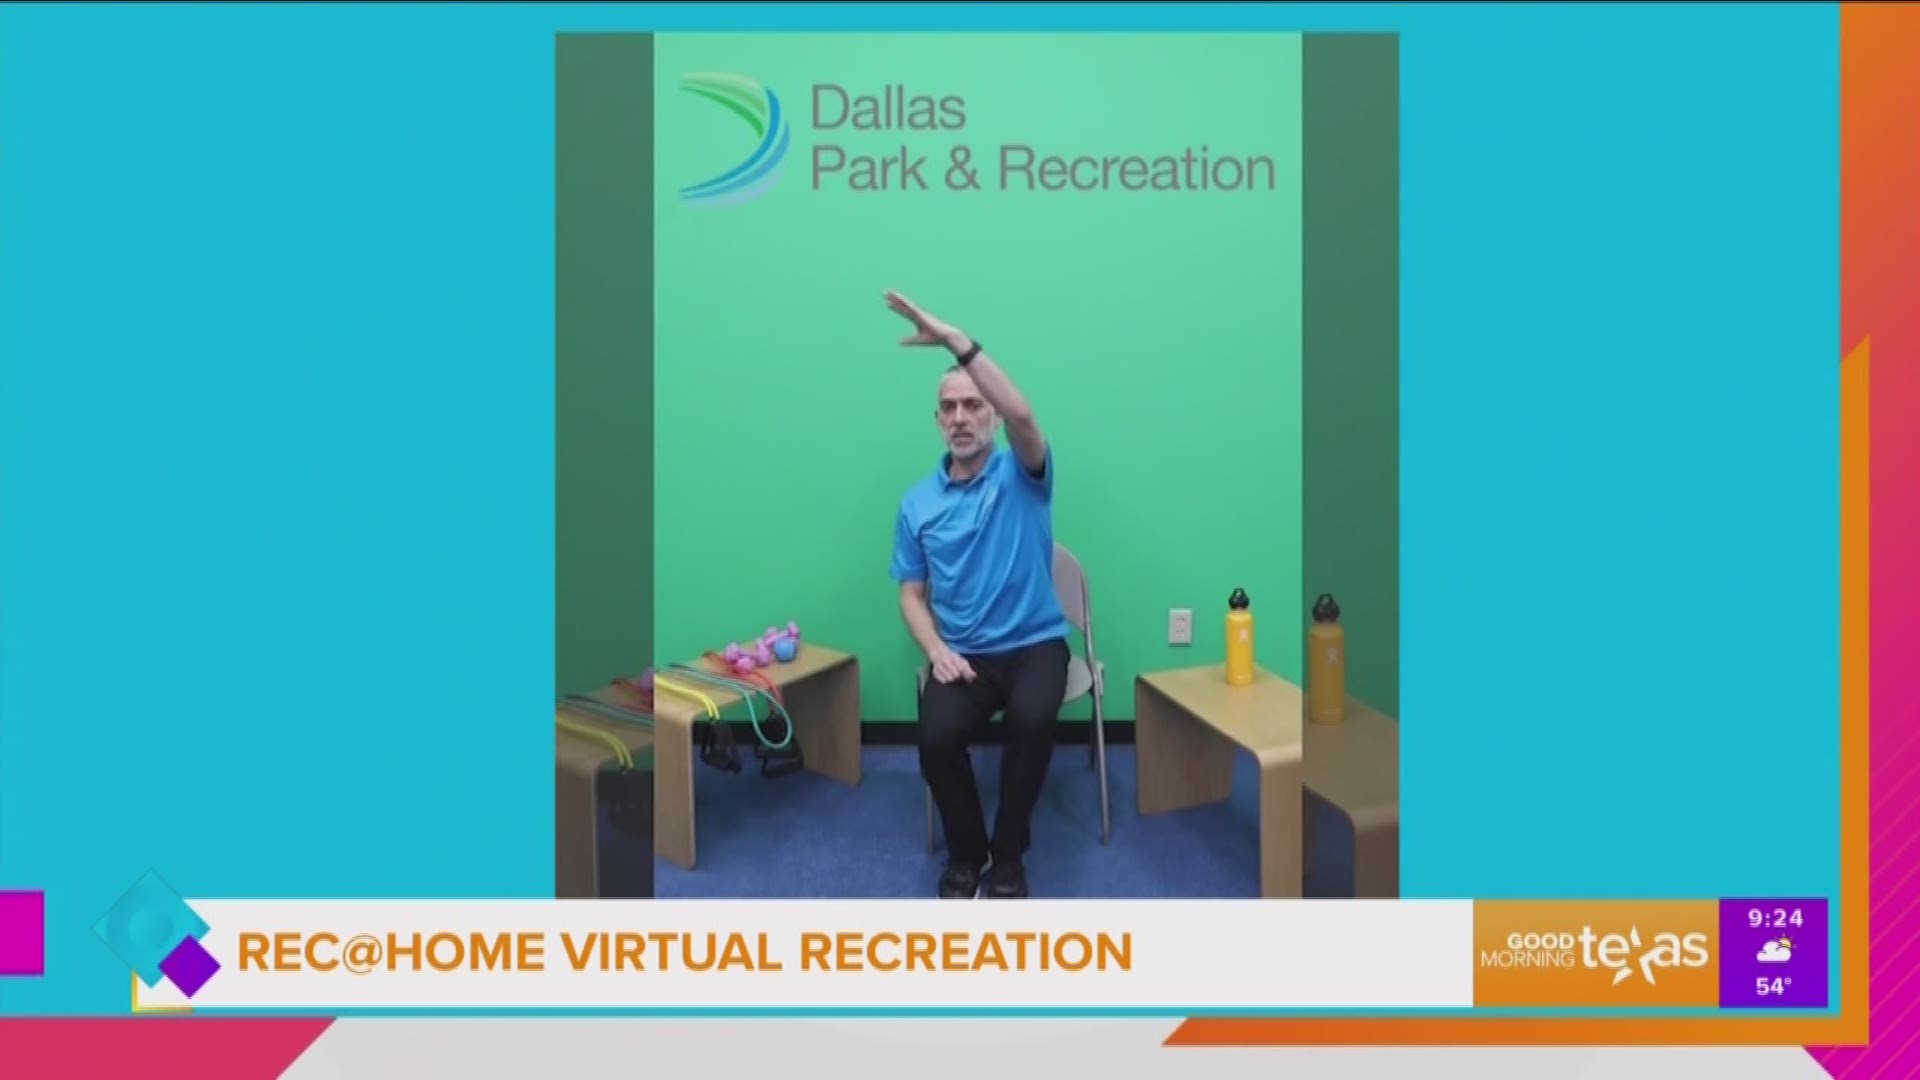 Everyone can access Rec@Home virtual recreation at DallasParks.org and click on Rec@Home.  You can also follow them @DallasParkRec.